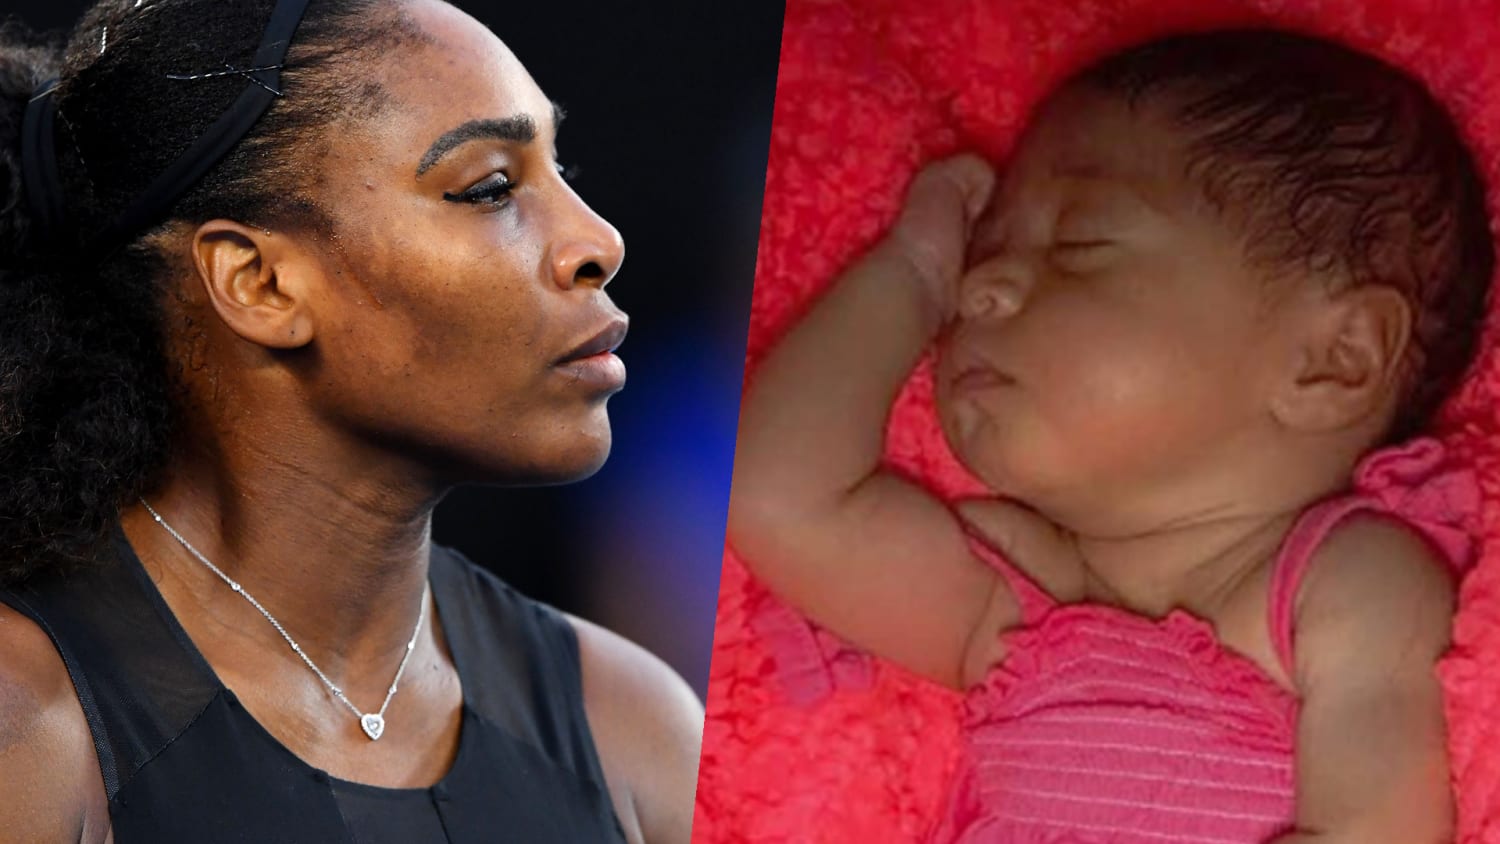 New mom Serena Williams withdraws from Australian Open - TODAY.com